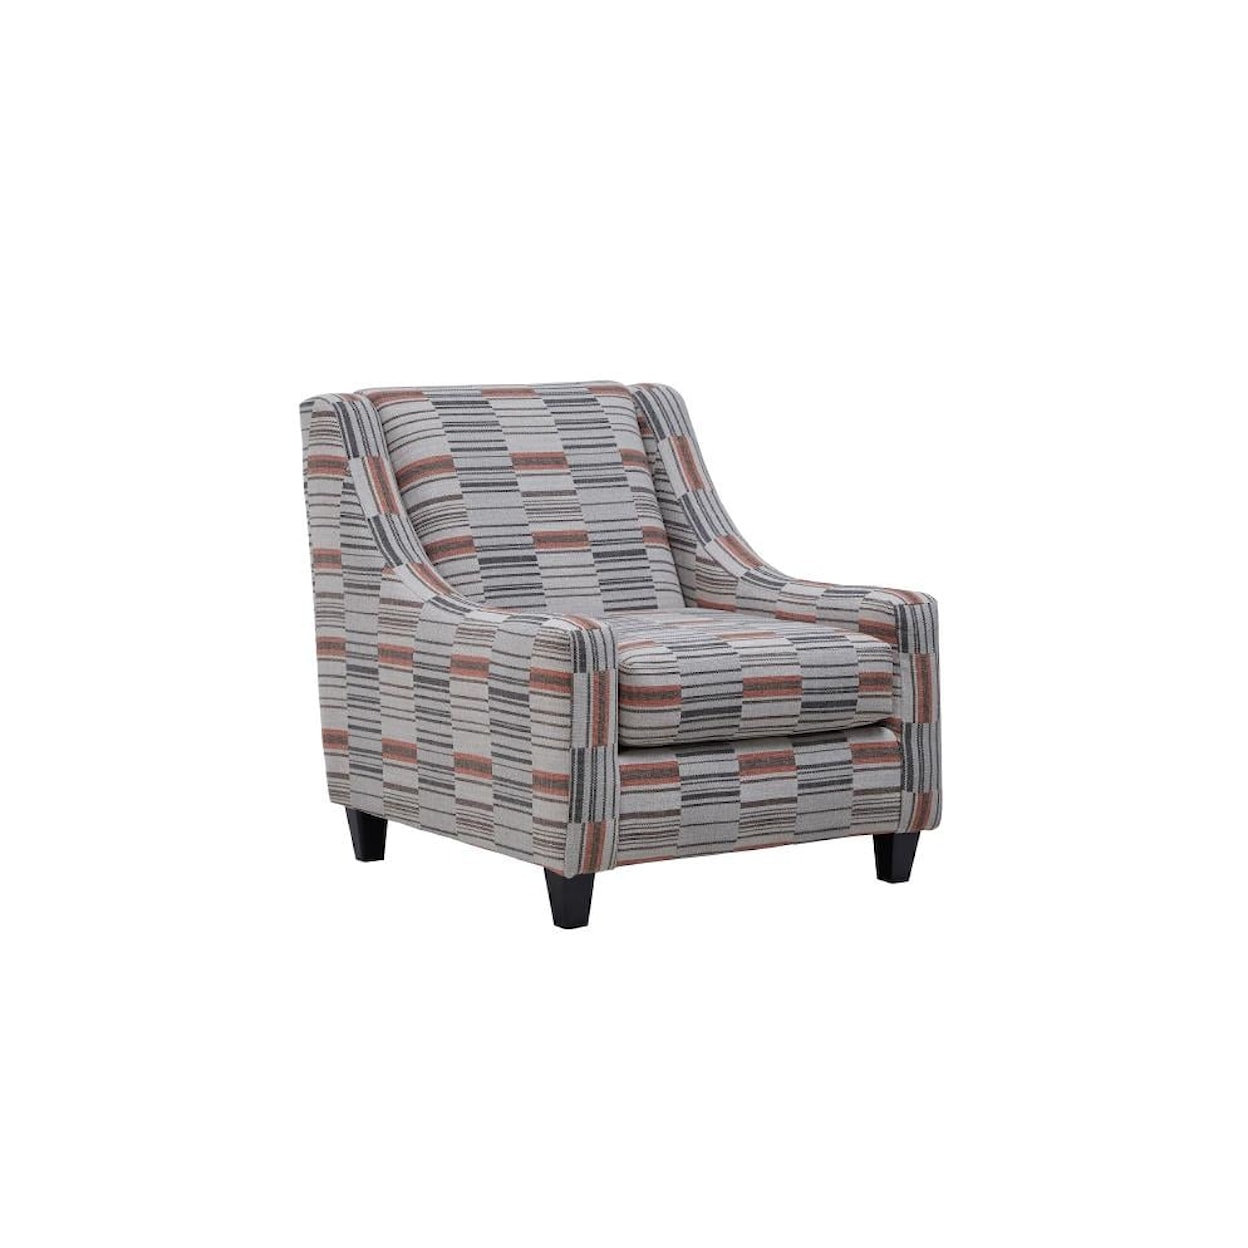 VFM Signature 3005 STANLEY SANDSTONE Accent Chair with Exposed Wooden Legs